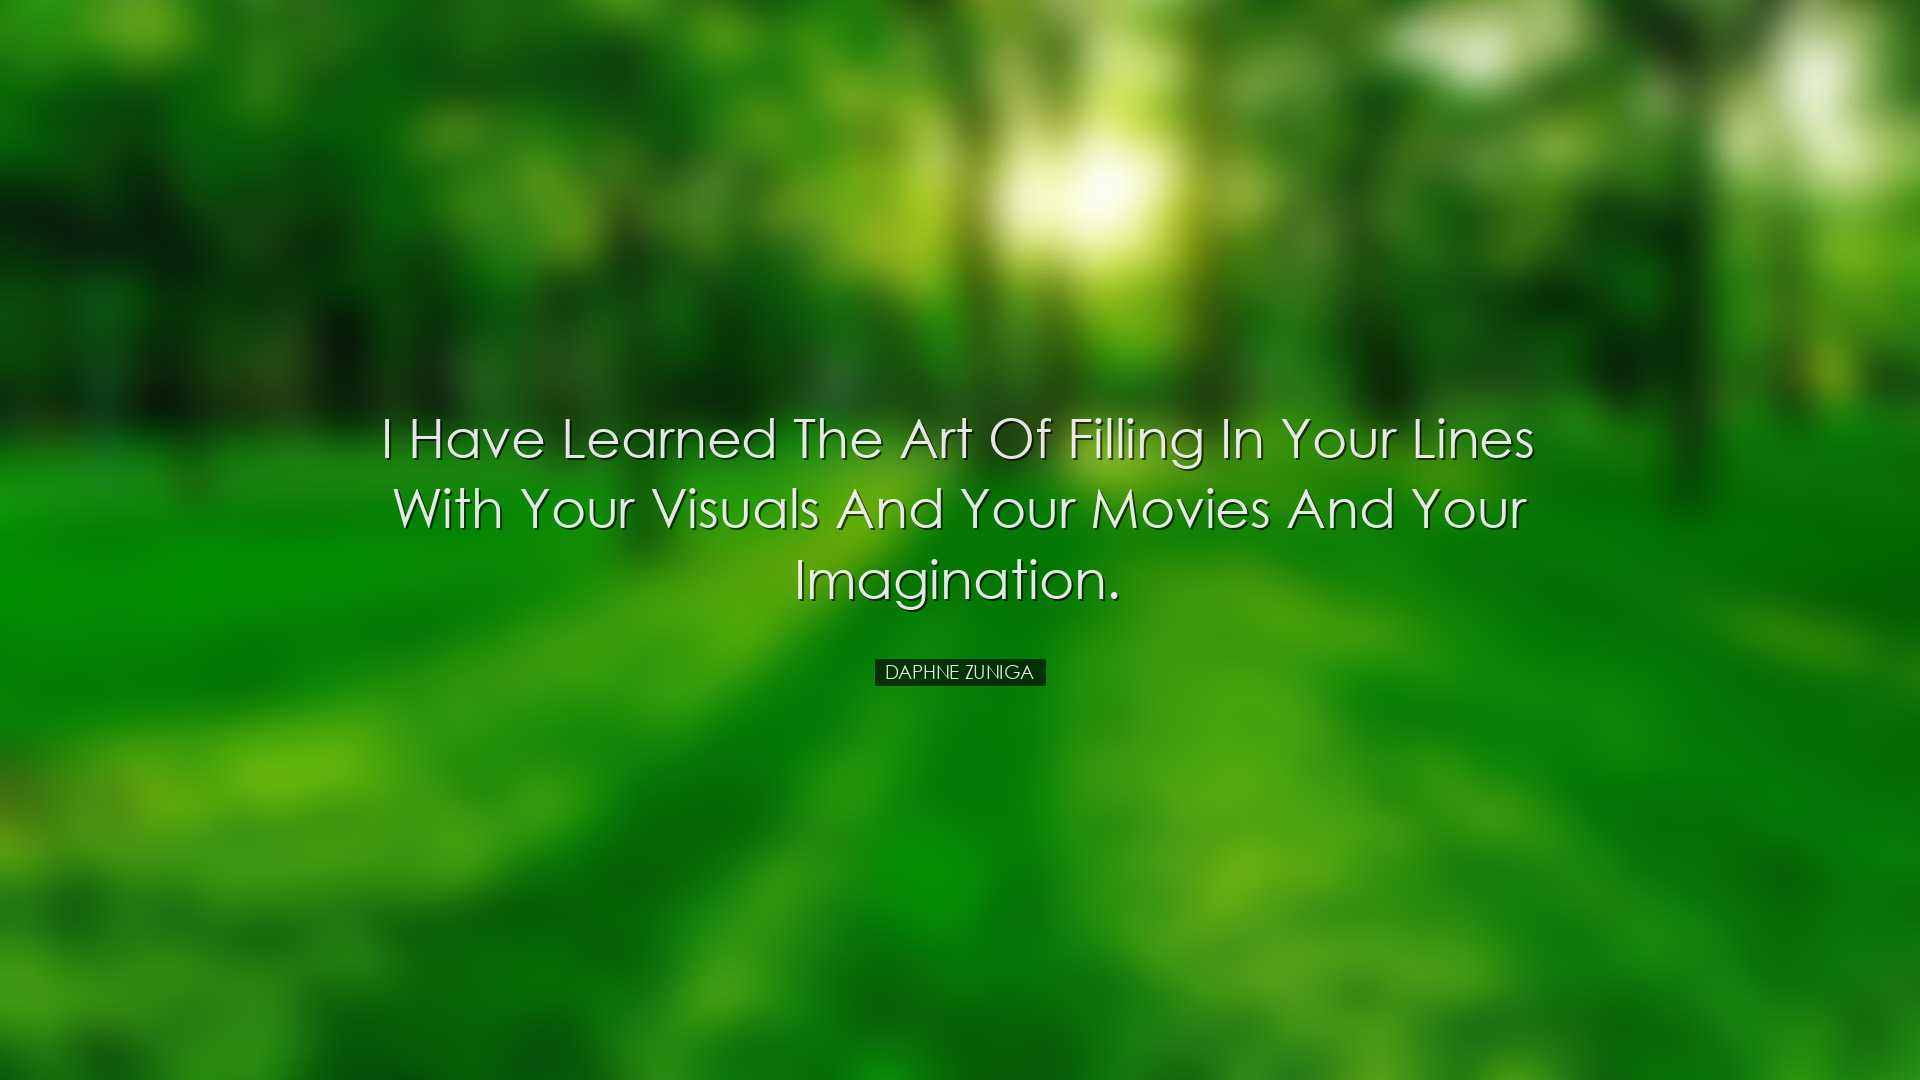 I have learned the art of filling in your lines with your visuals